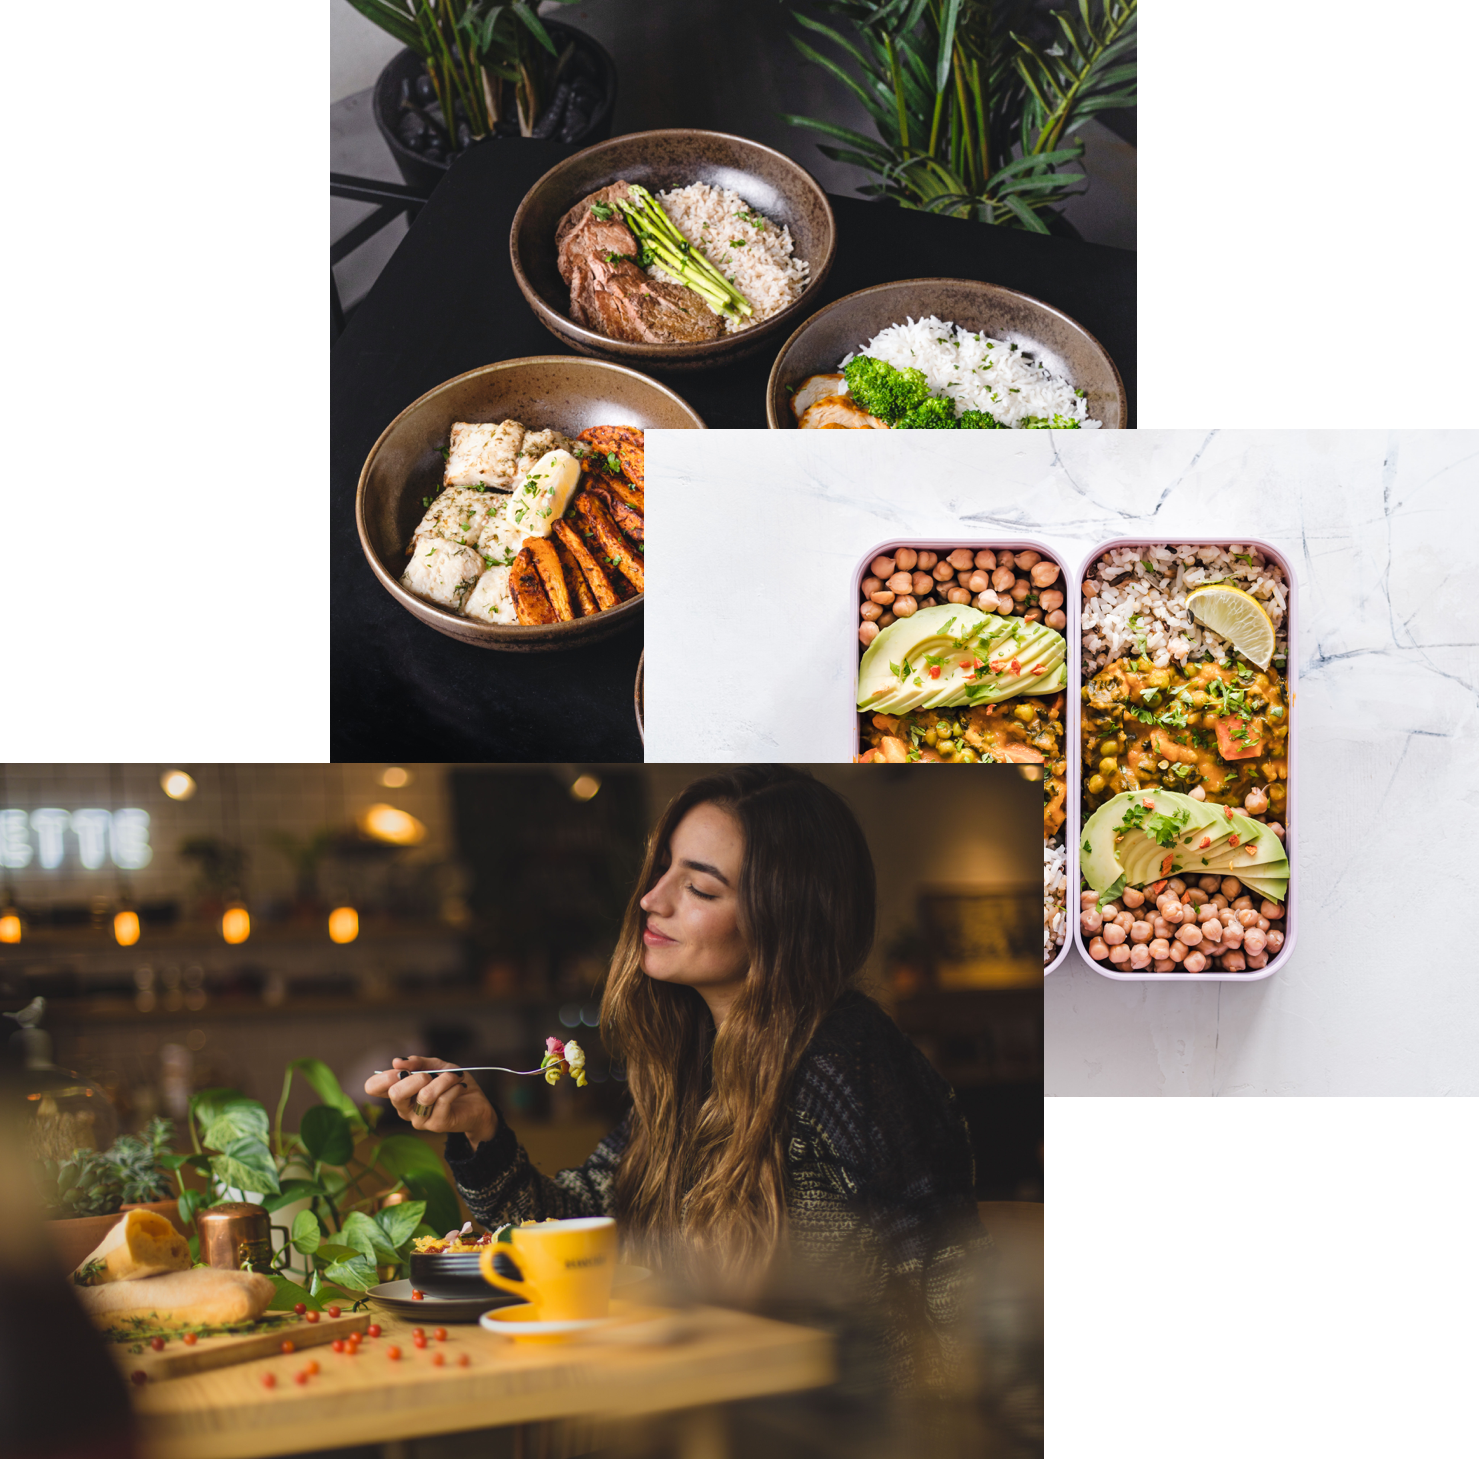 Woman enjoying food, meals in storage in container, and foods bowls on a table